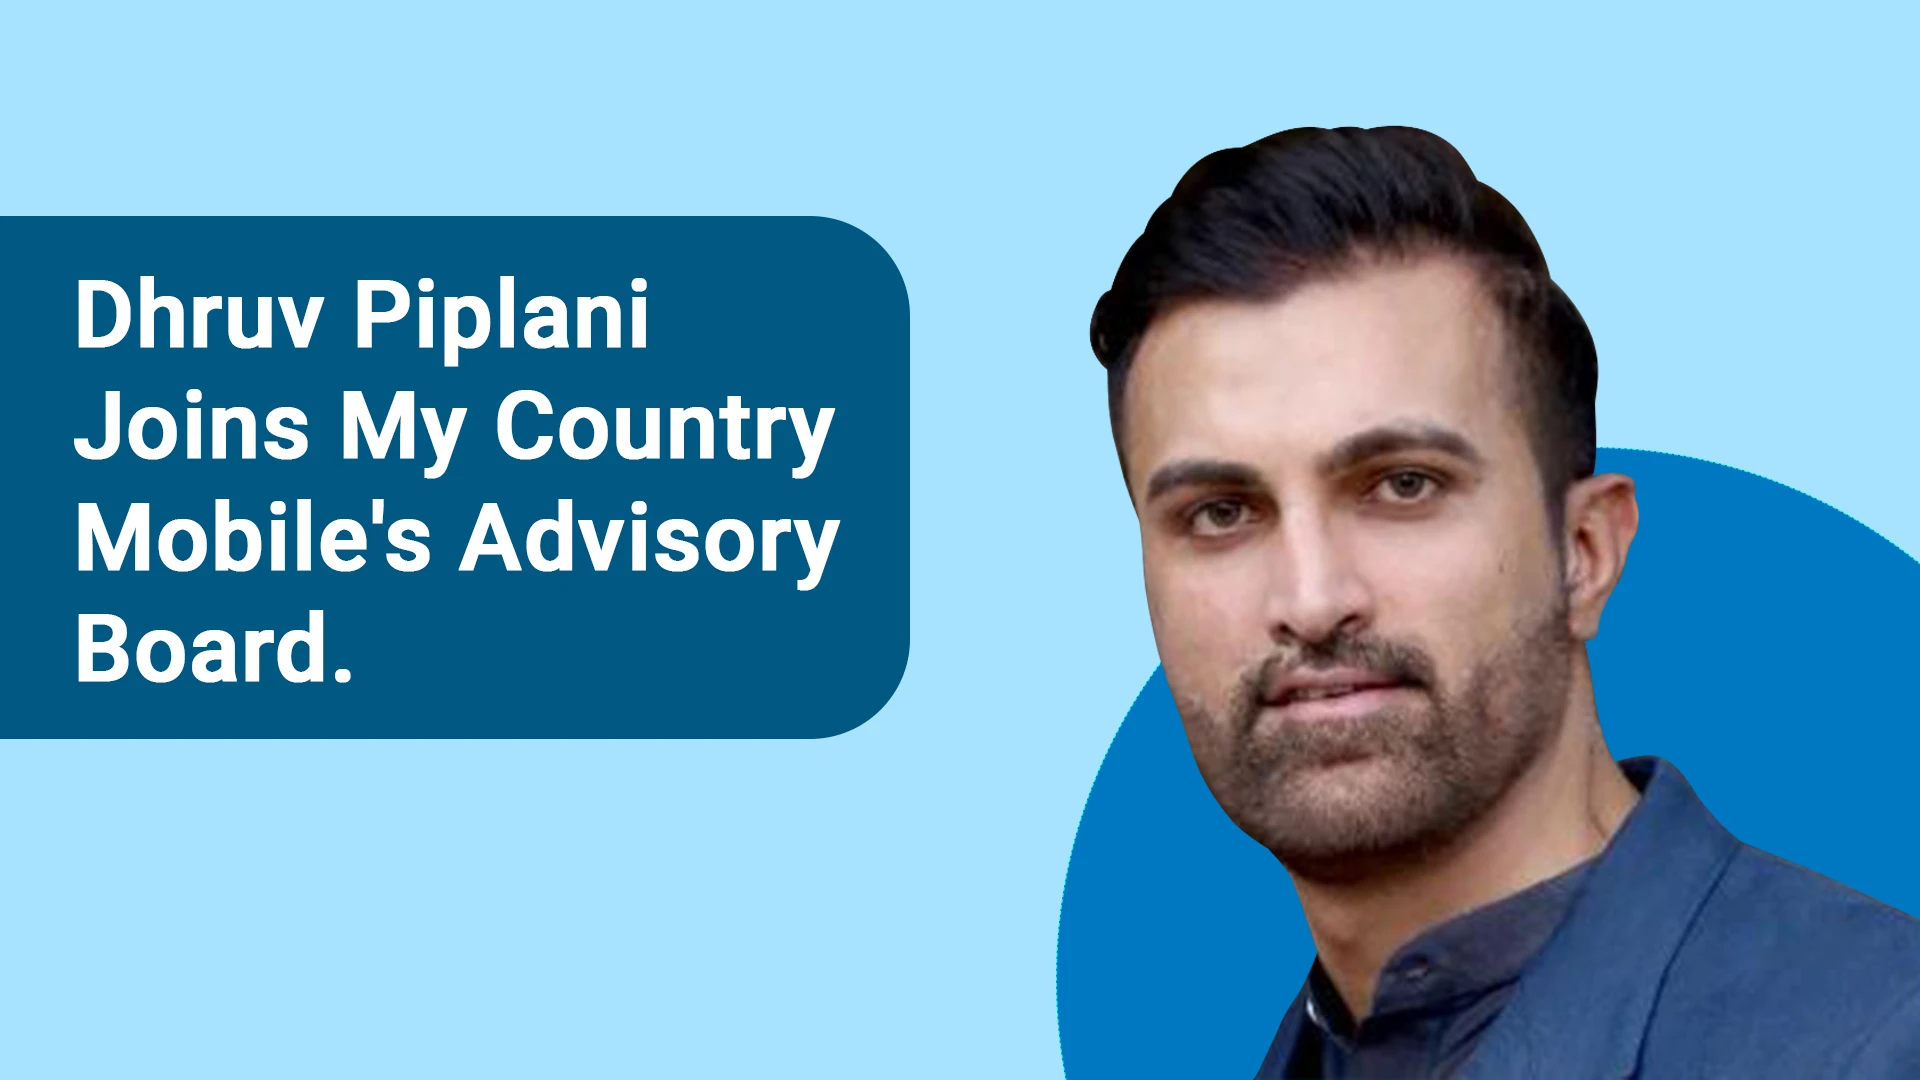 Dhruv Piplani Joins My Country Mobile's Advisory Board